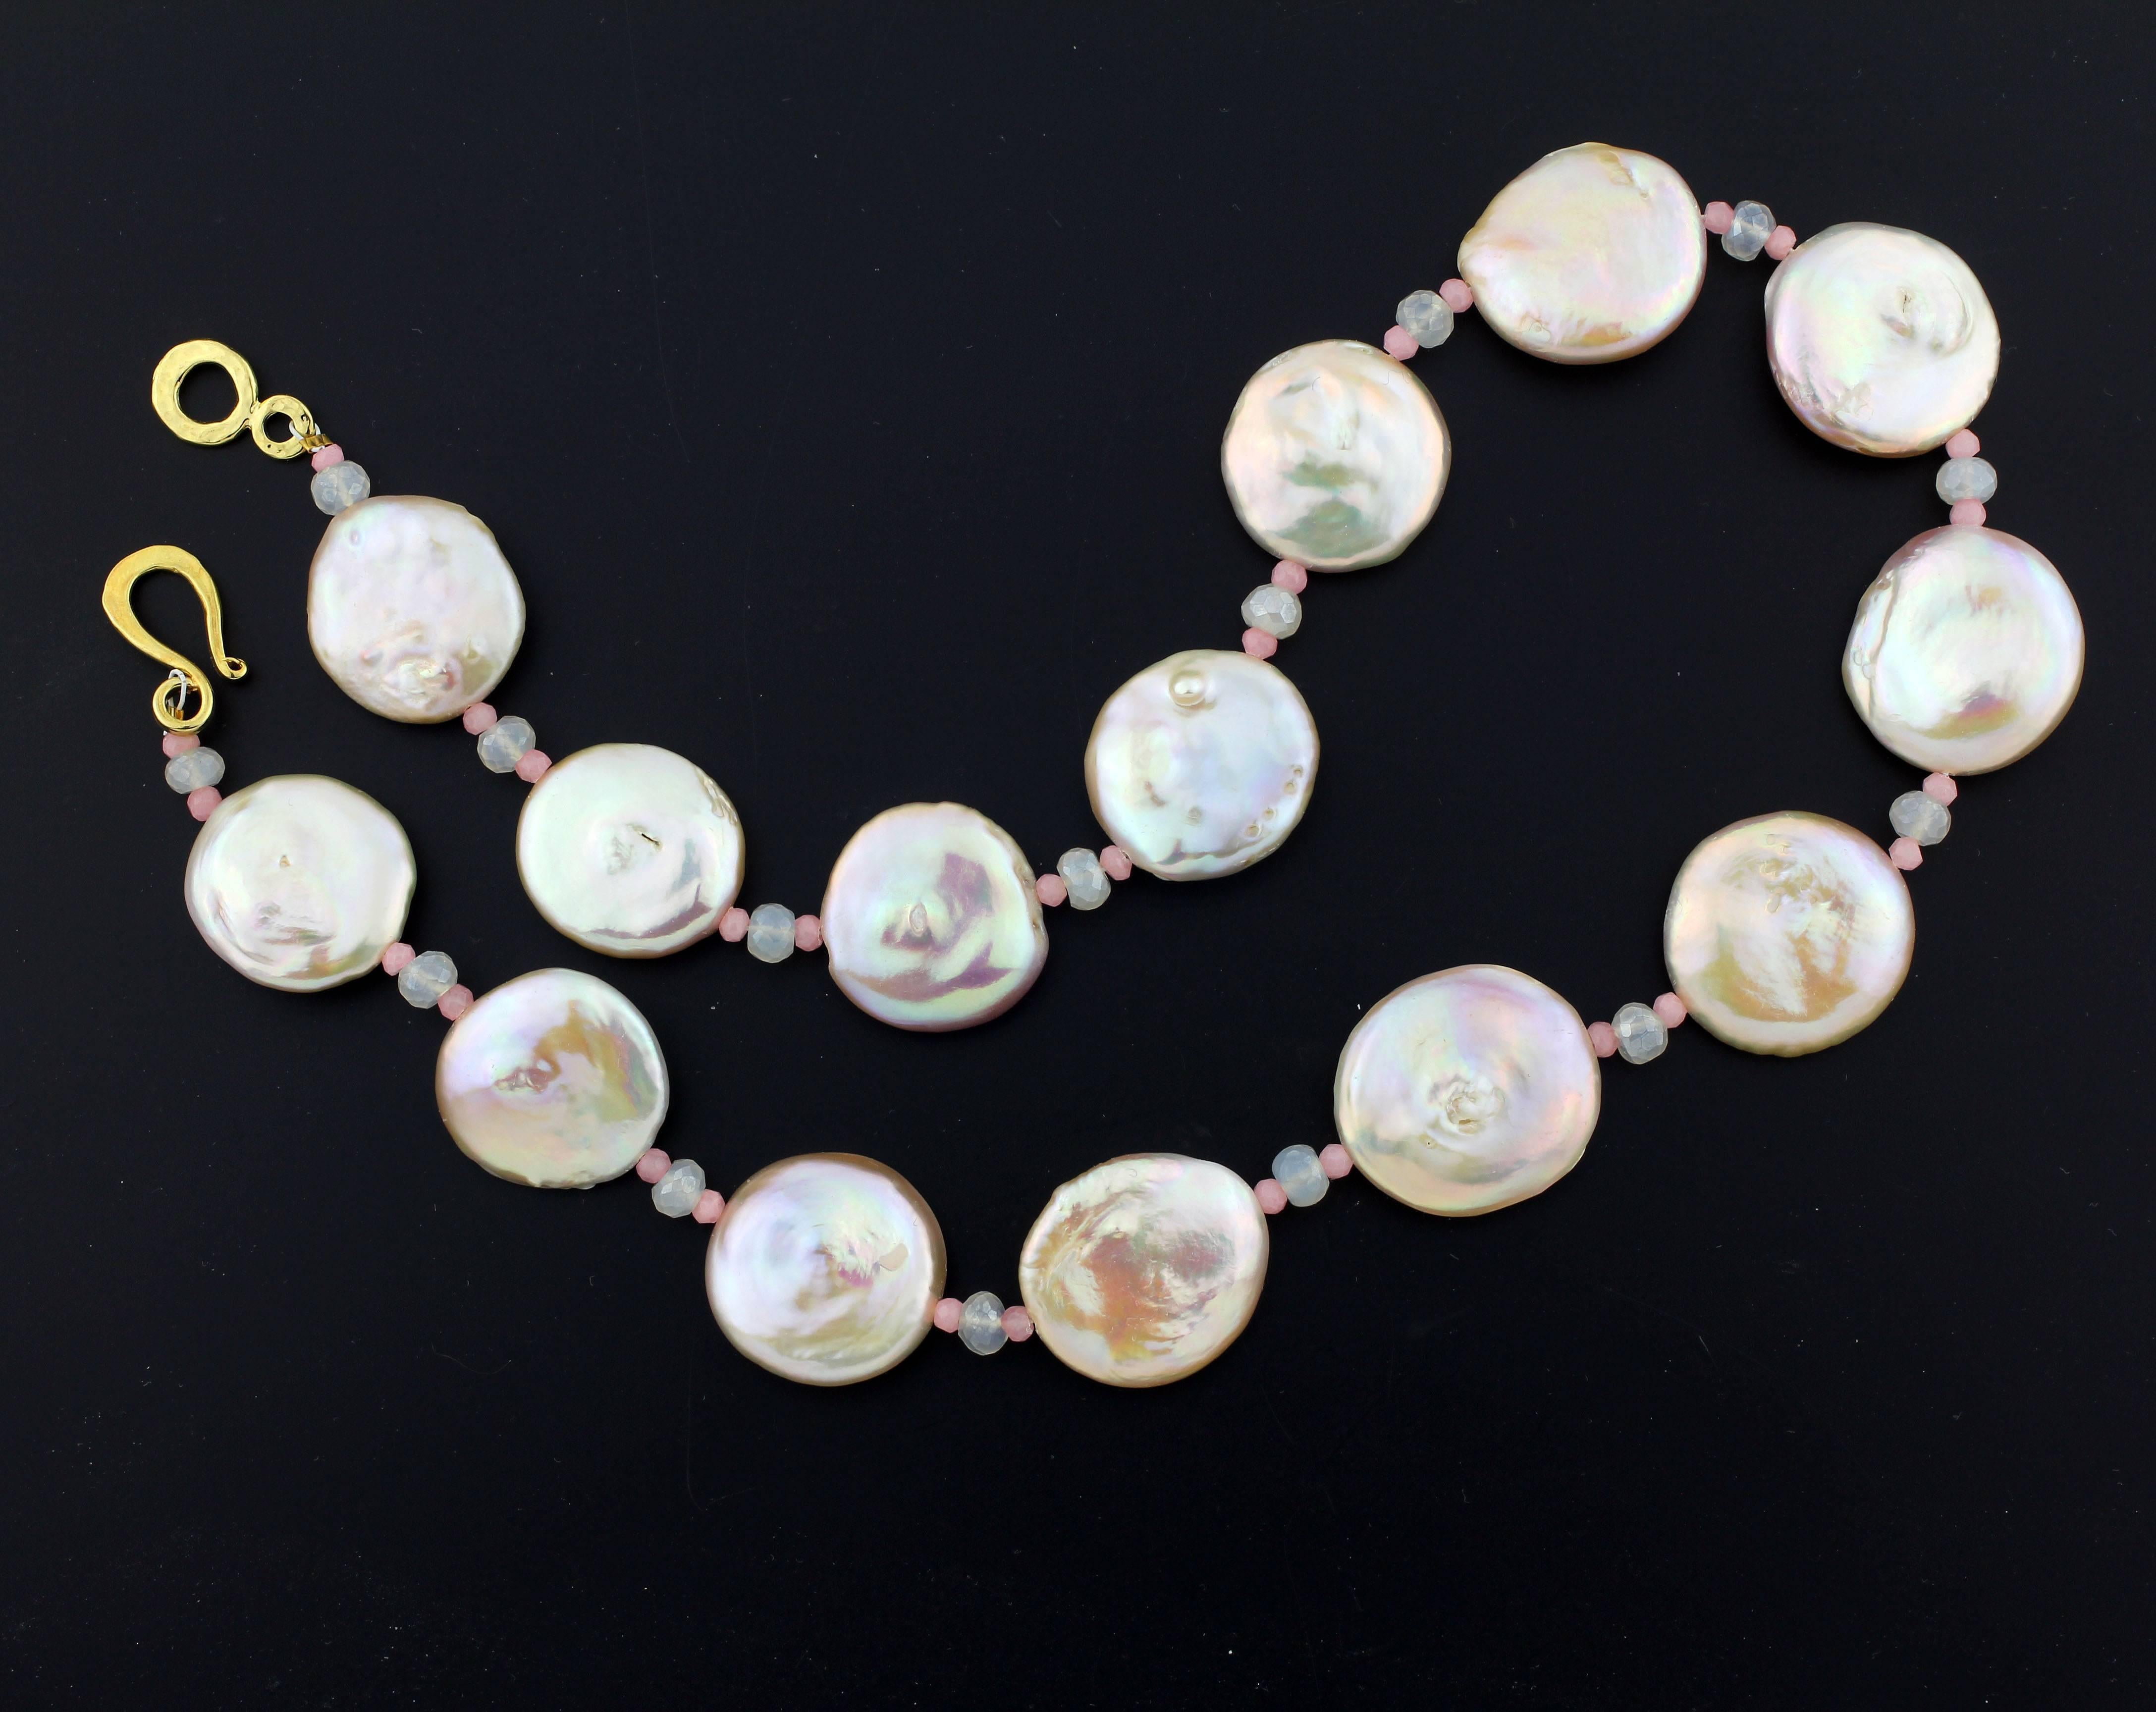 Brightly glowing freshwater cultured pinky white Coin Pearls enhanced with Moonstones and rare pink Opals accents set with a sterling silver gold plated clasp (vermeil clasp).  This is 17.25 inches long.  